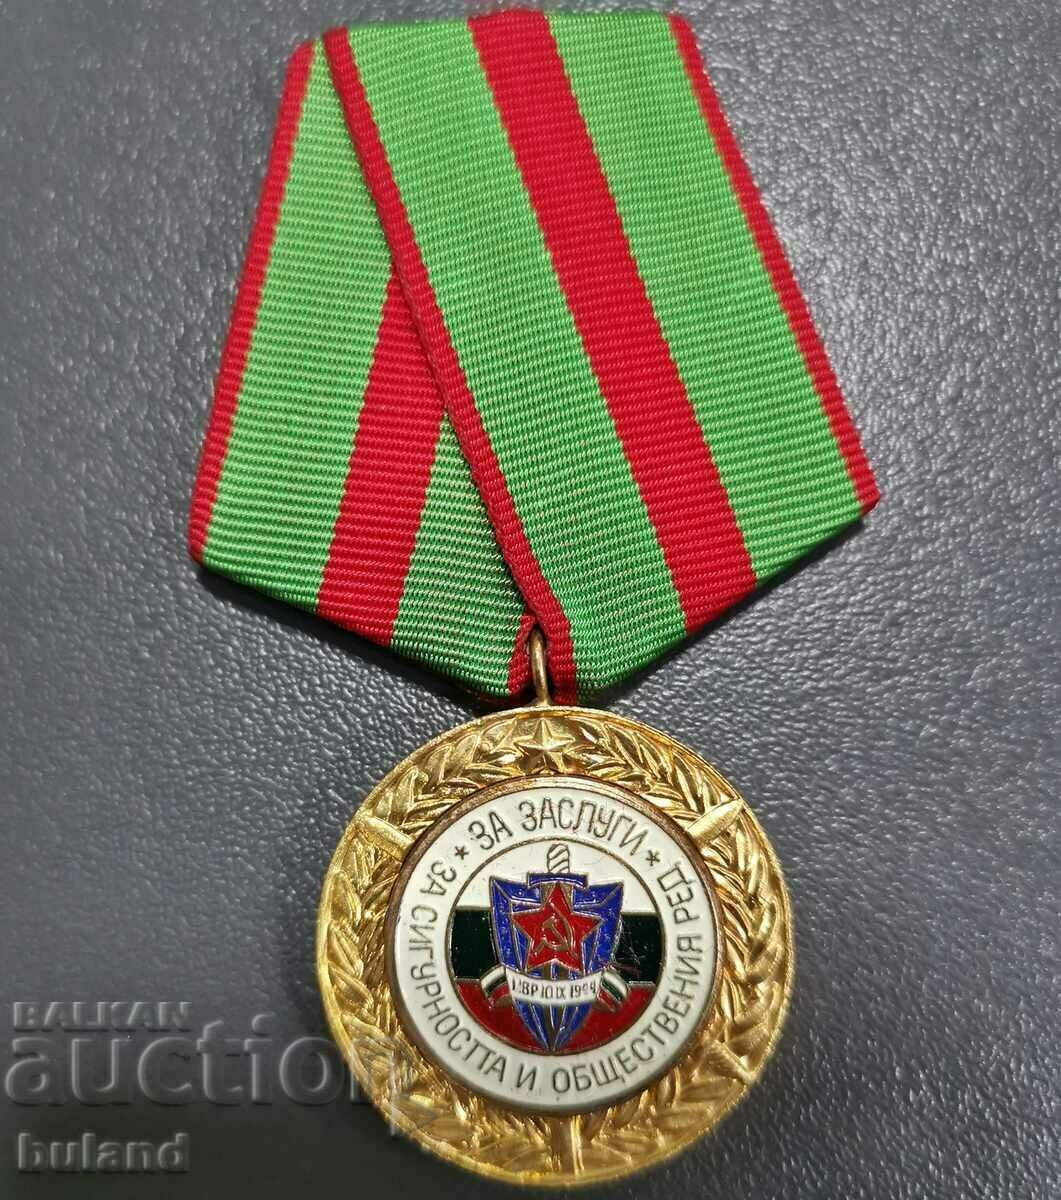 Ministry of Interior Medal for Merit for Security and Public Order with Color